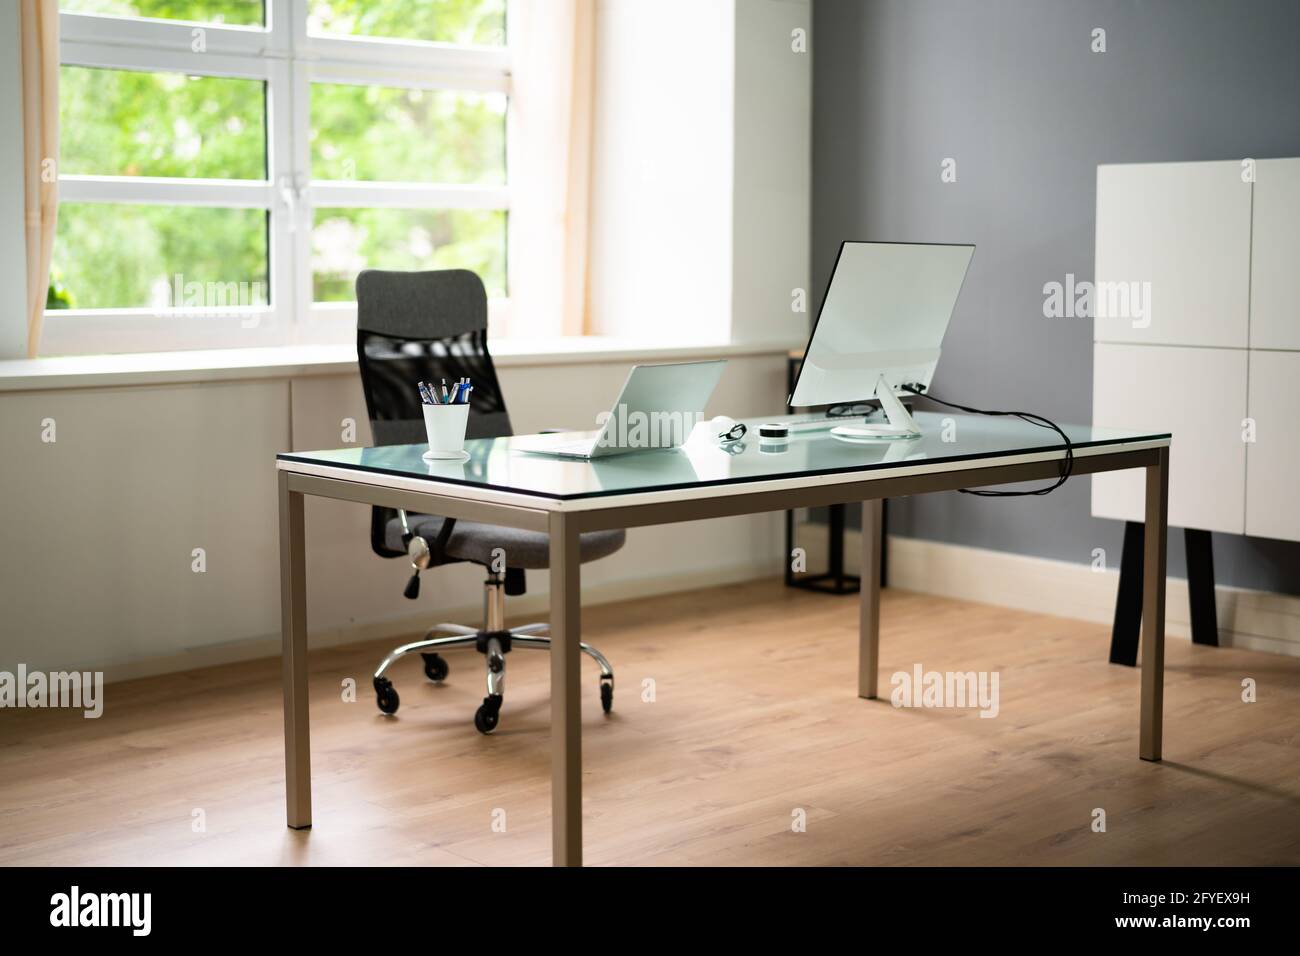 Office Room And Furniture With Computer Monitor Stock Photo